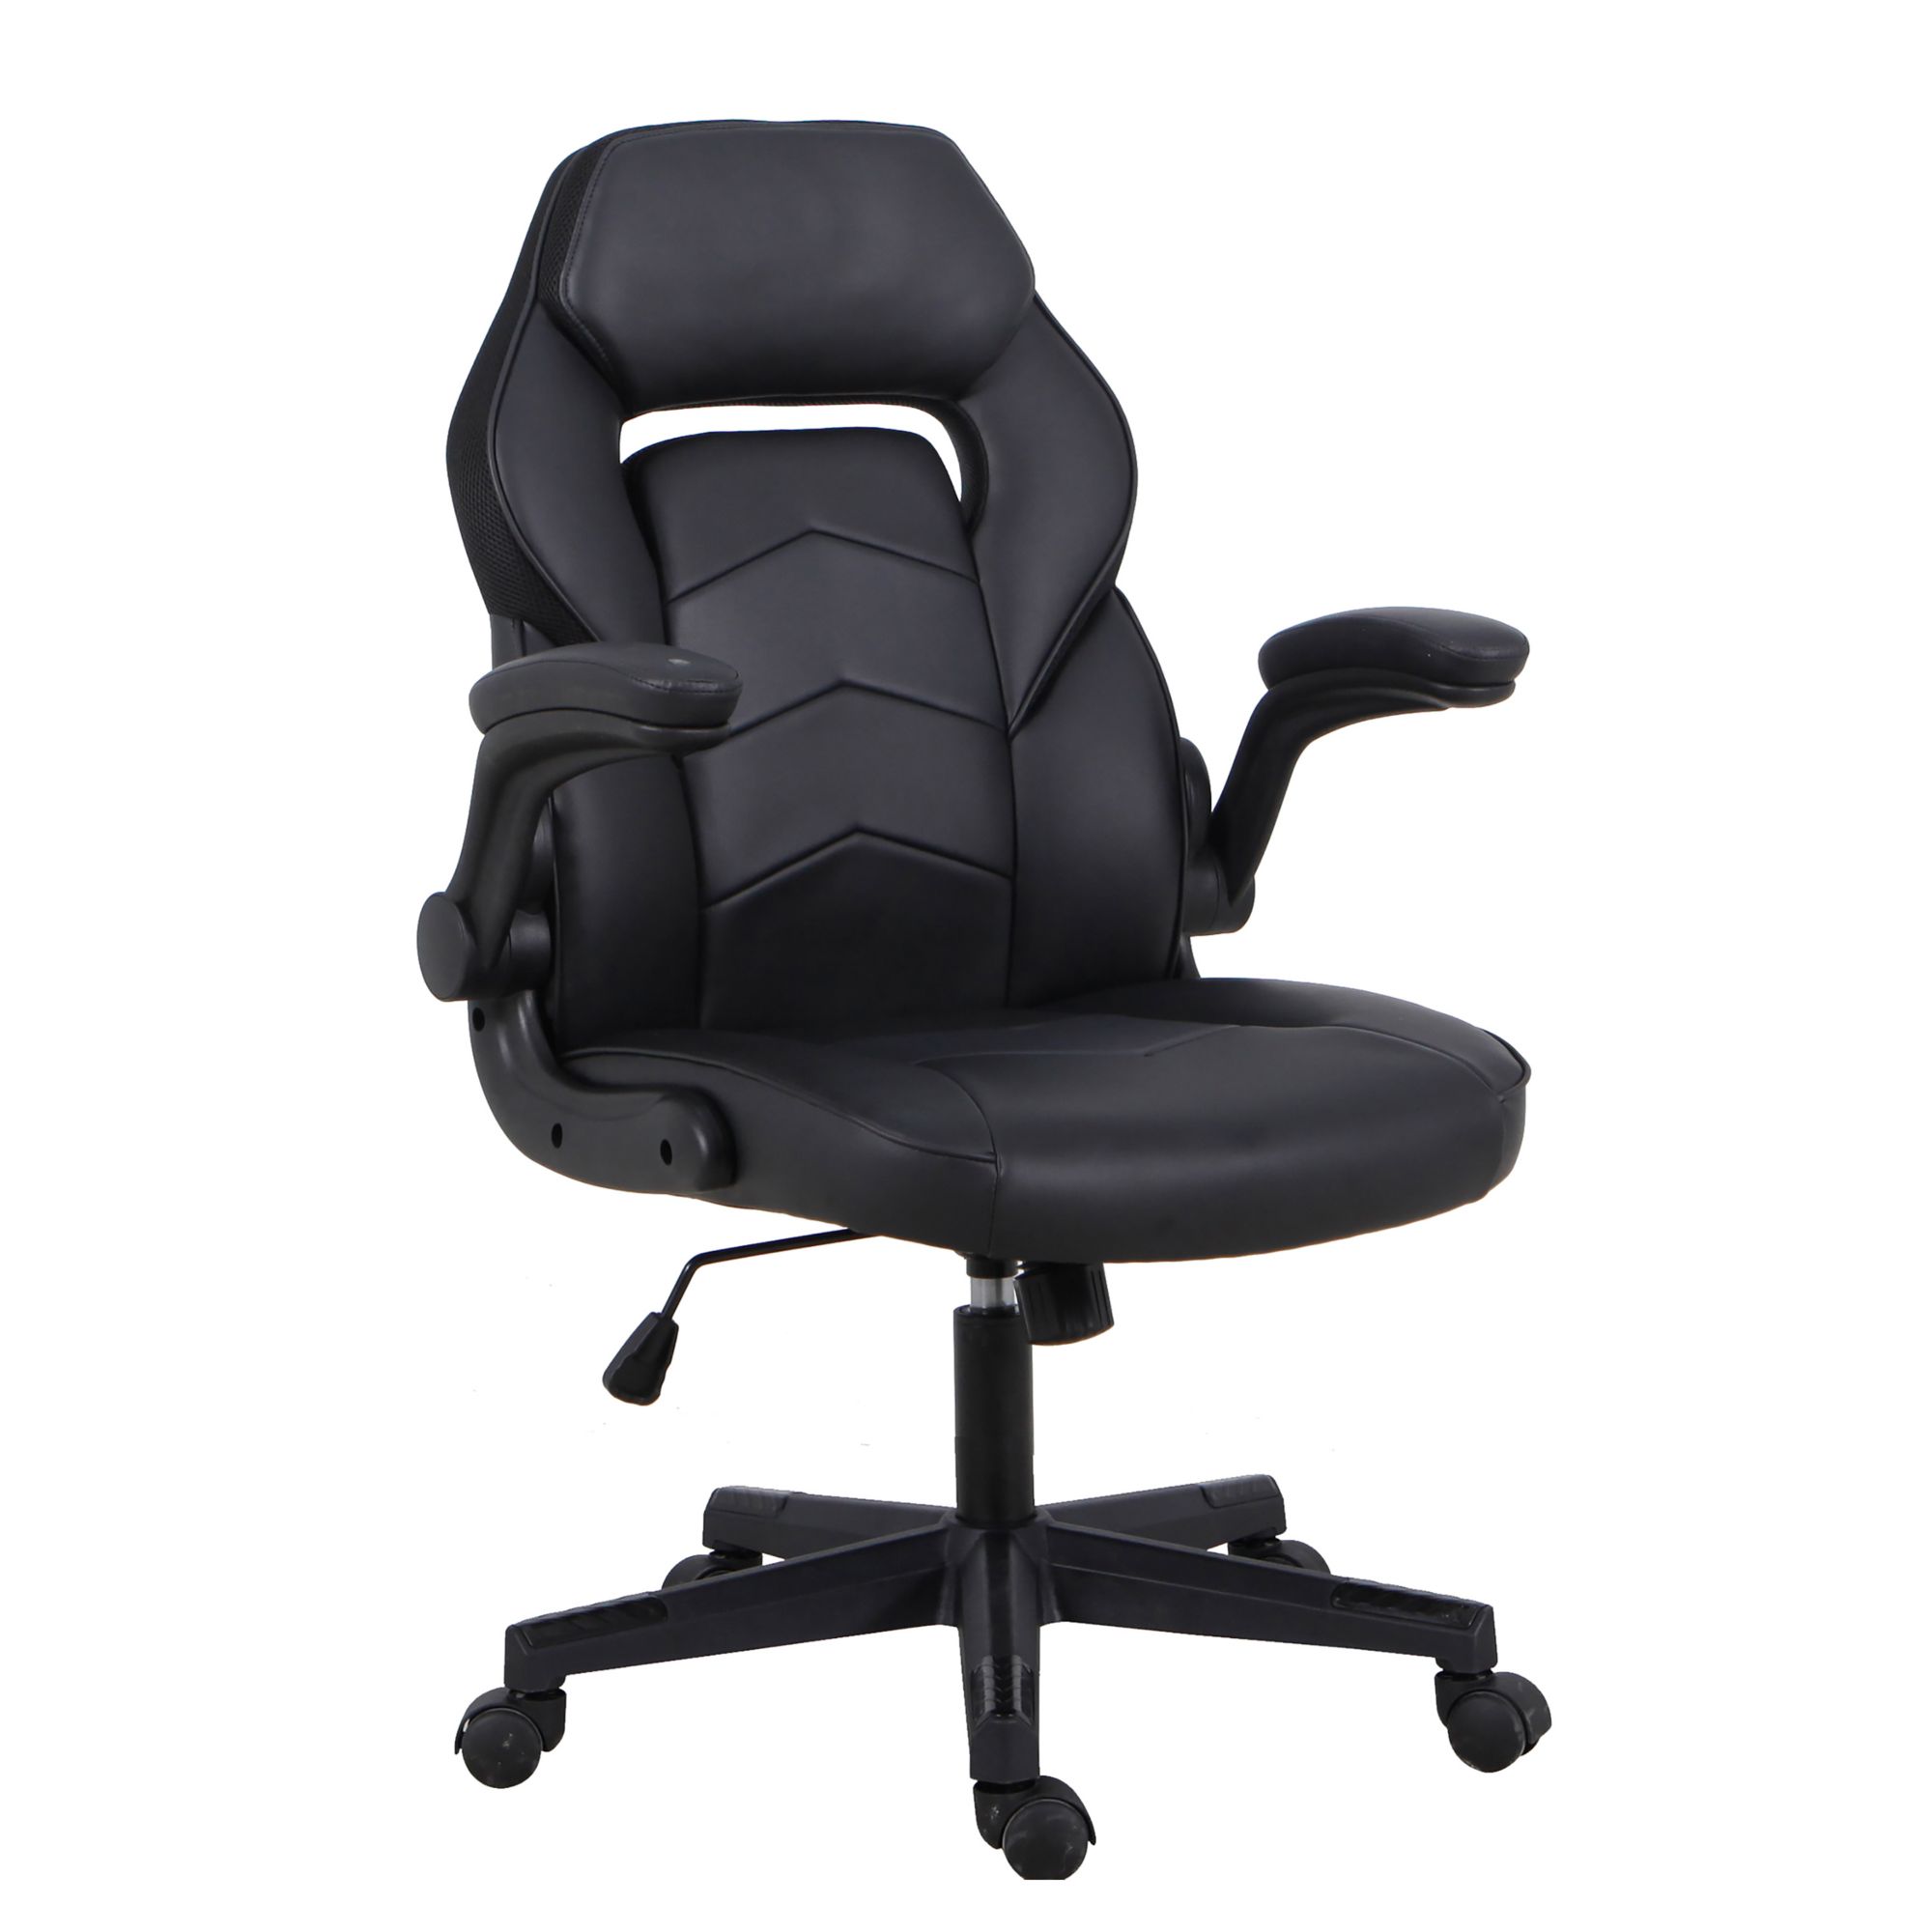 Office and Gaming Chair with Adjustable Height (in-store pickup only)